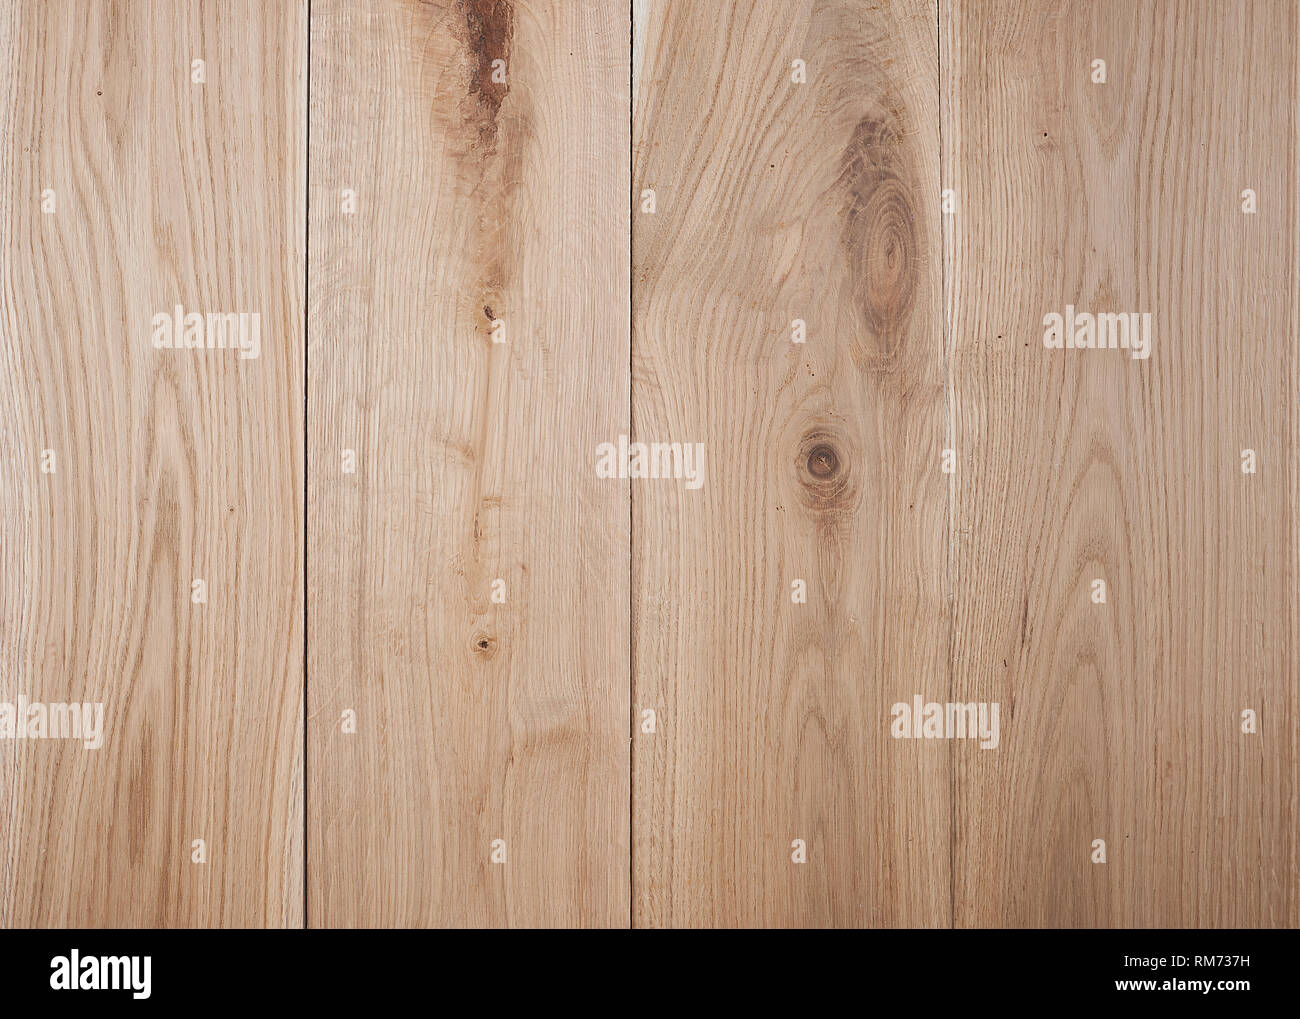 wooden background from oak boards, full frame Stock Photo